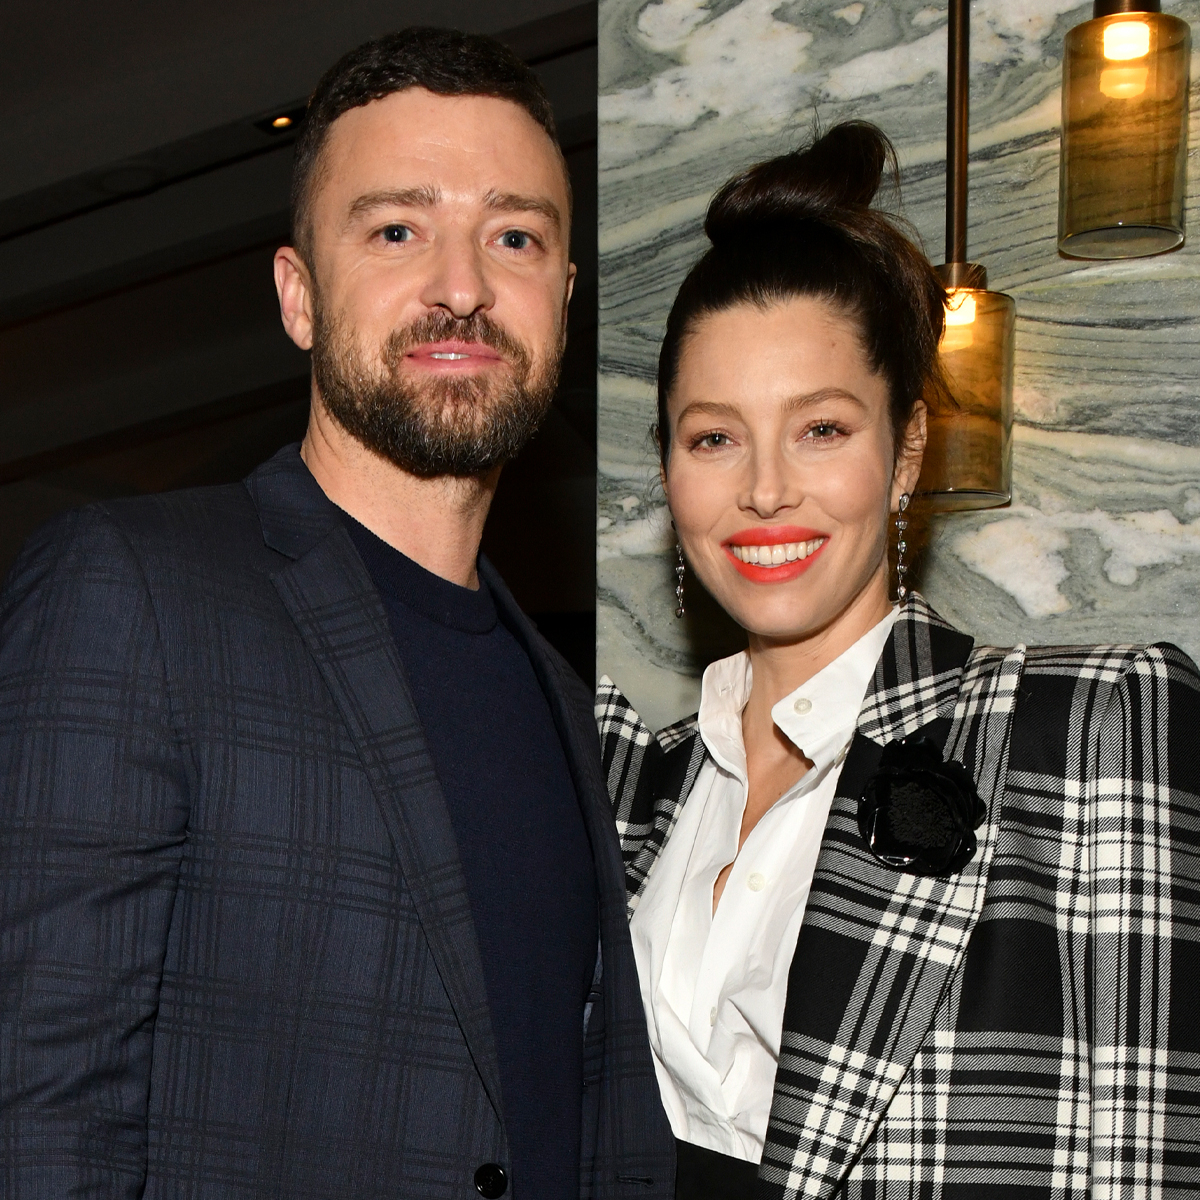 Justin Timberlake shares workout video with Jessica Biel